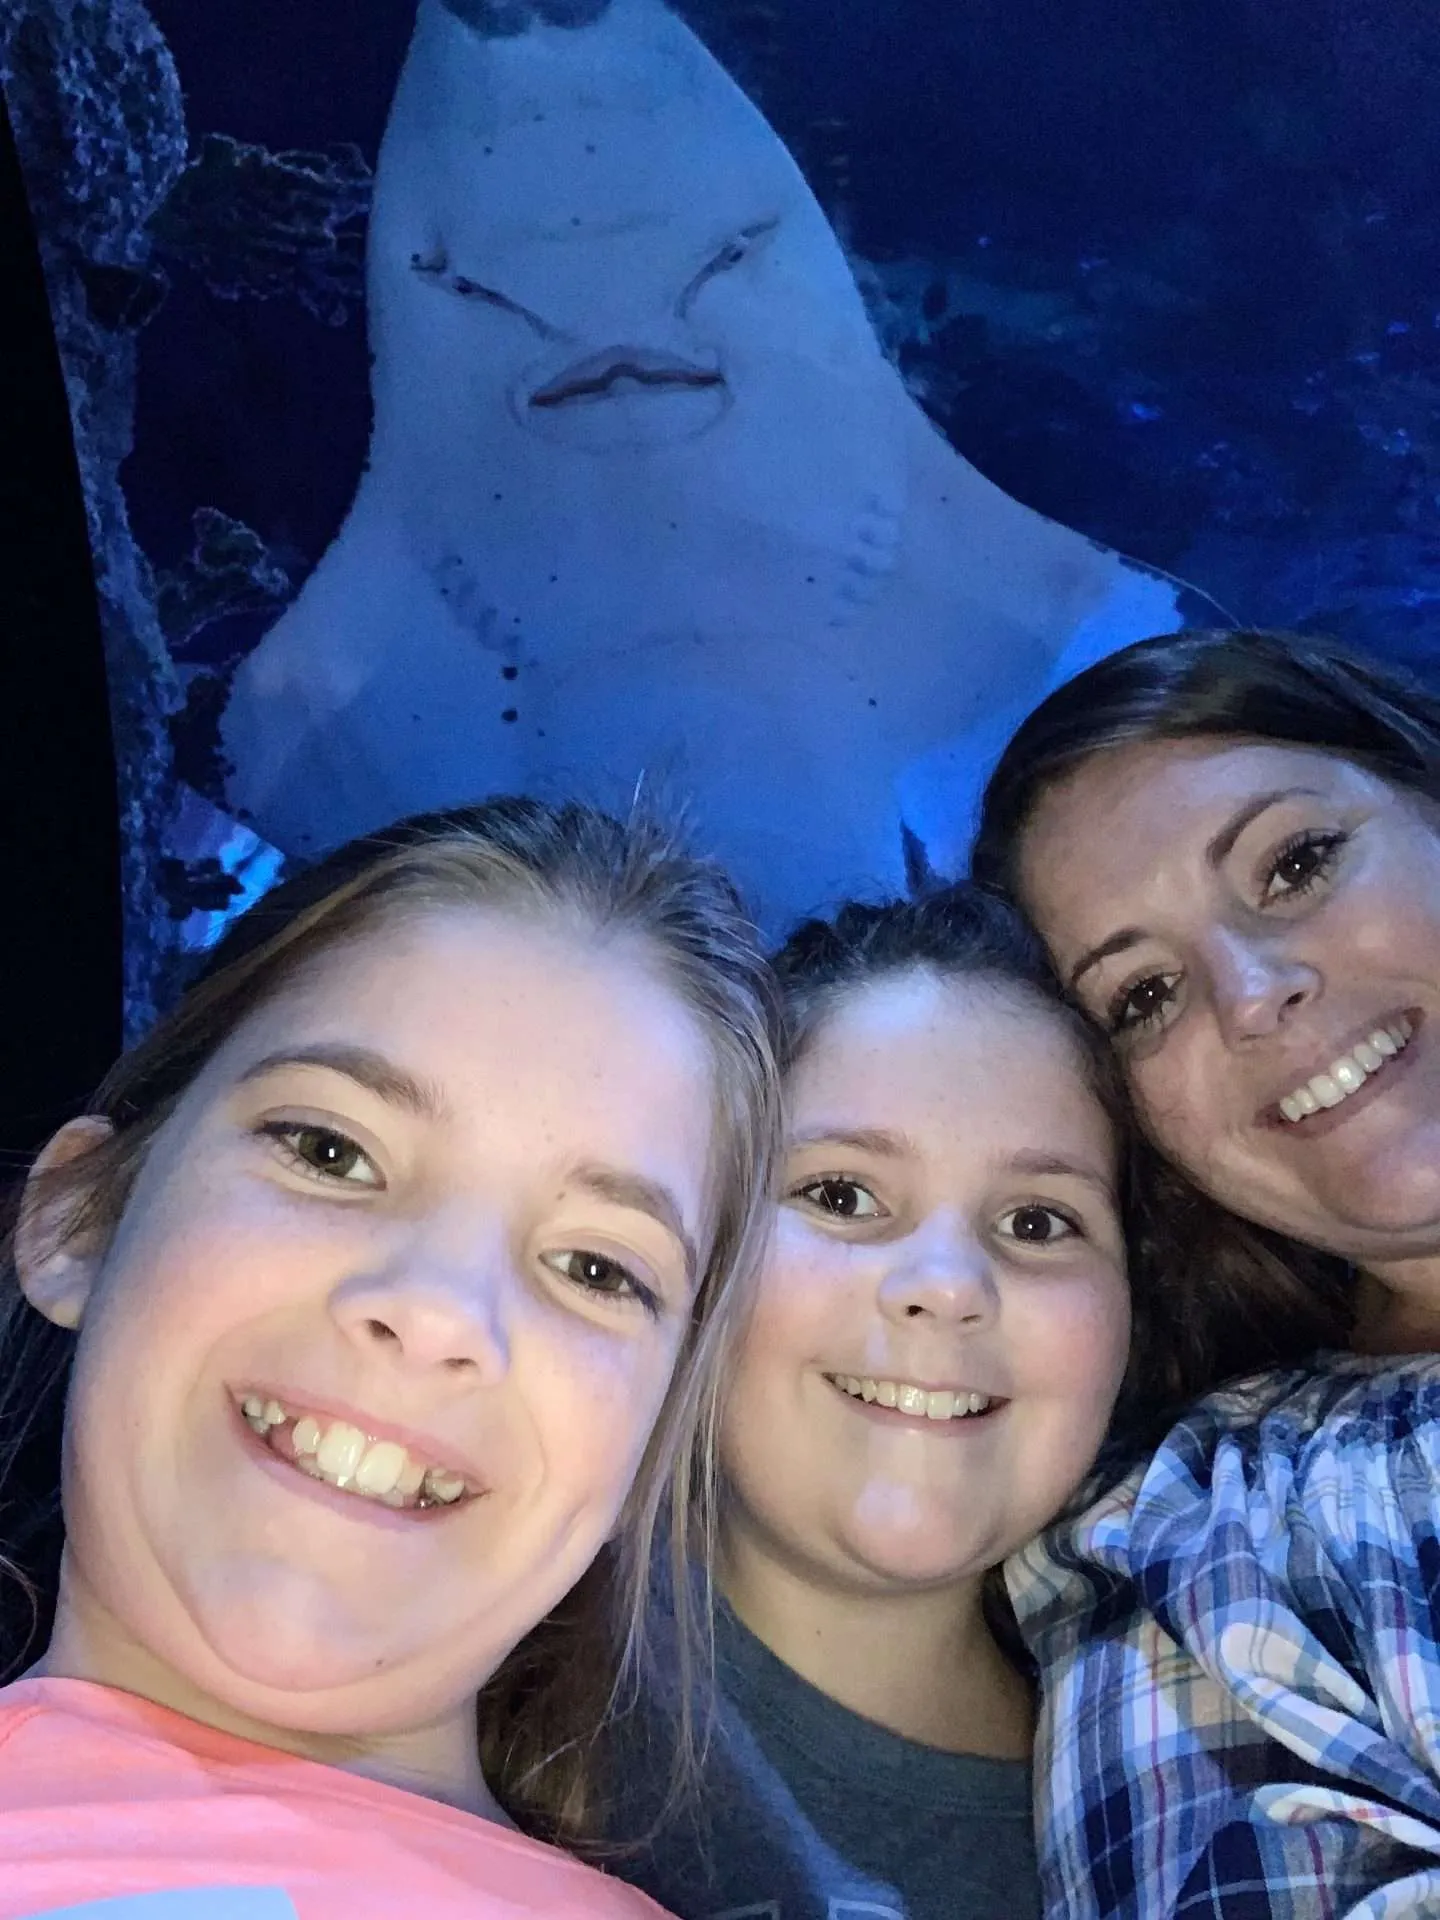 We took a selfie with a shark at the aquarium in Dallas.